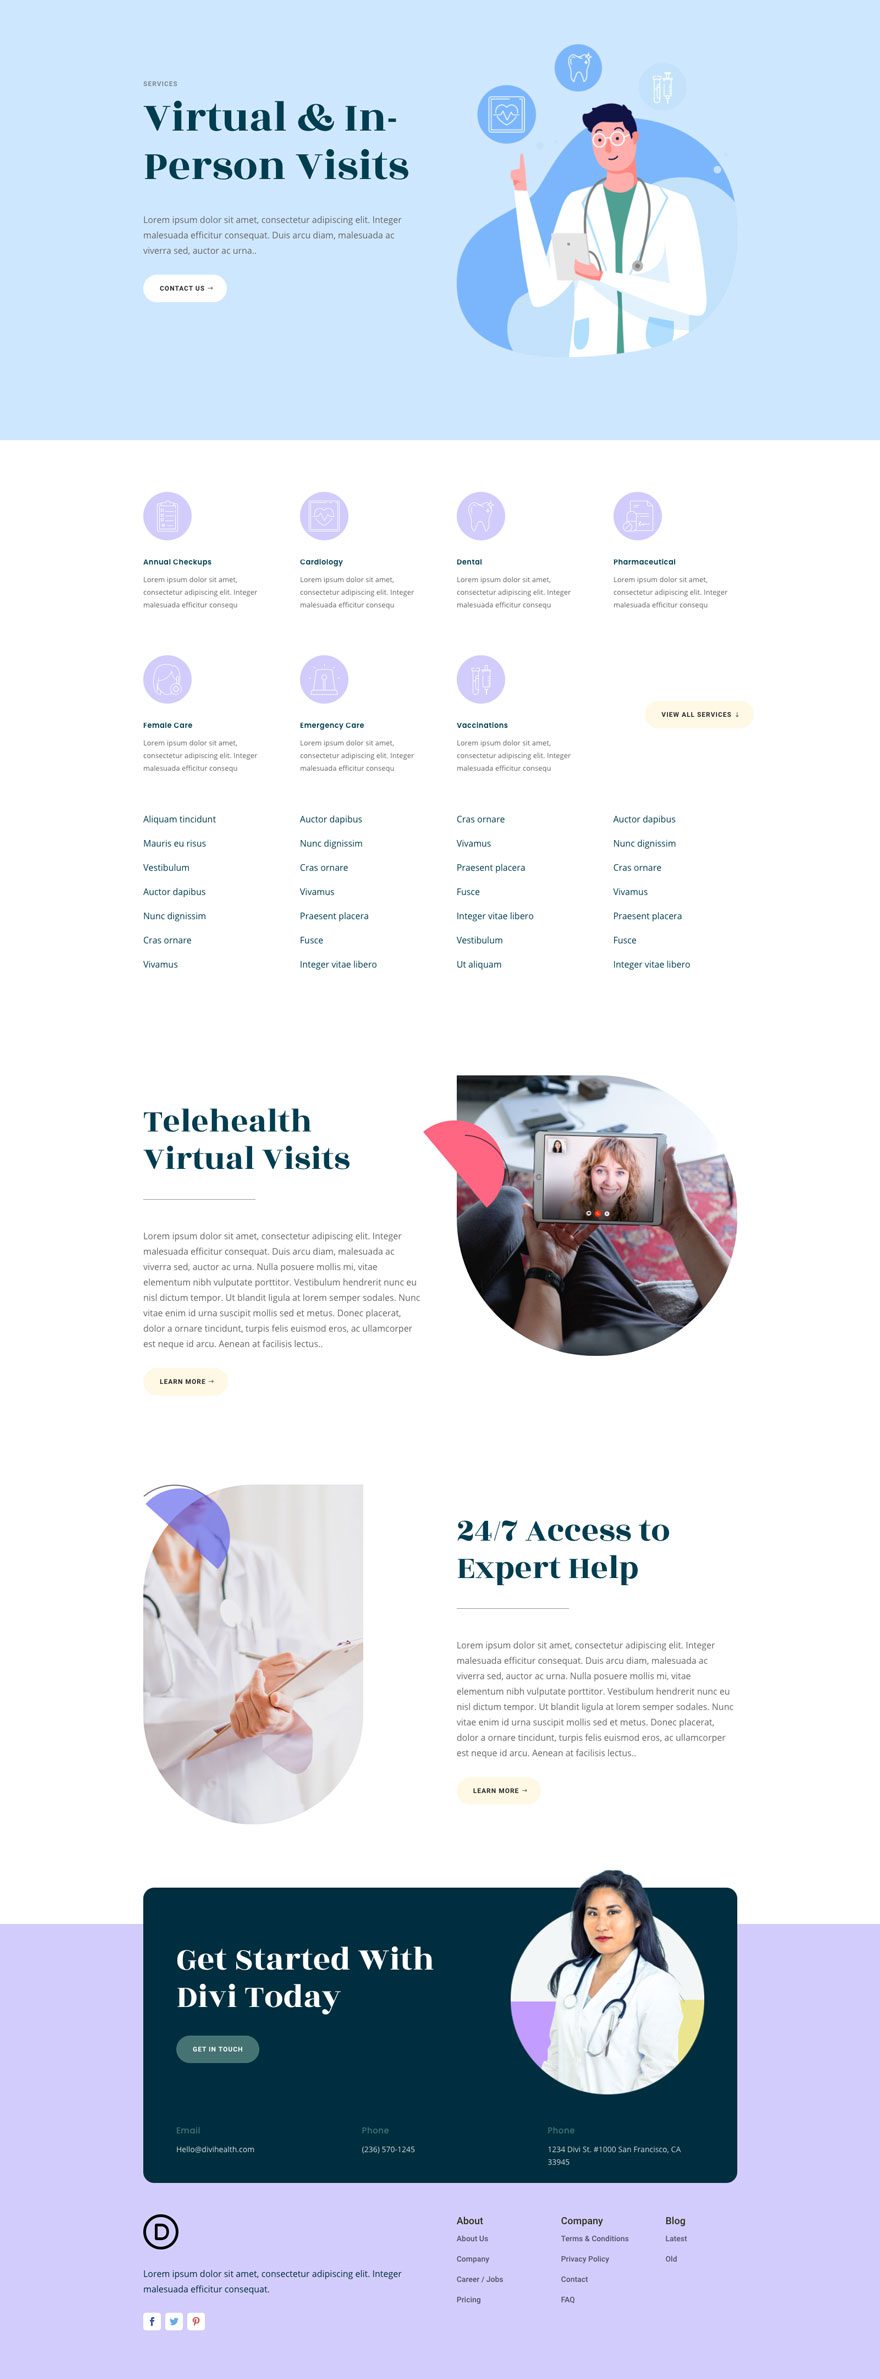 Get a FREE Telehealth Layout Pack for Divi 1